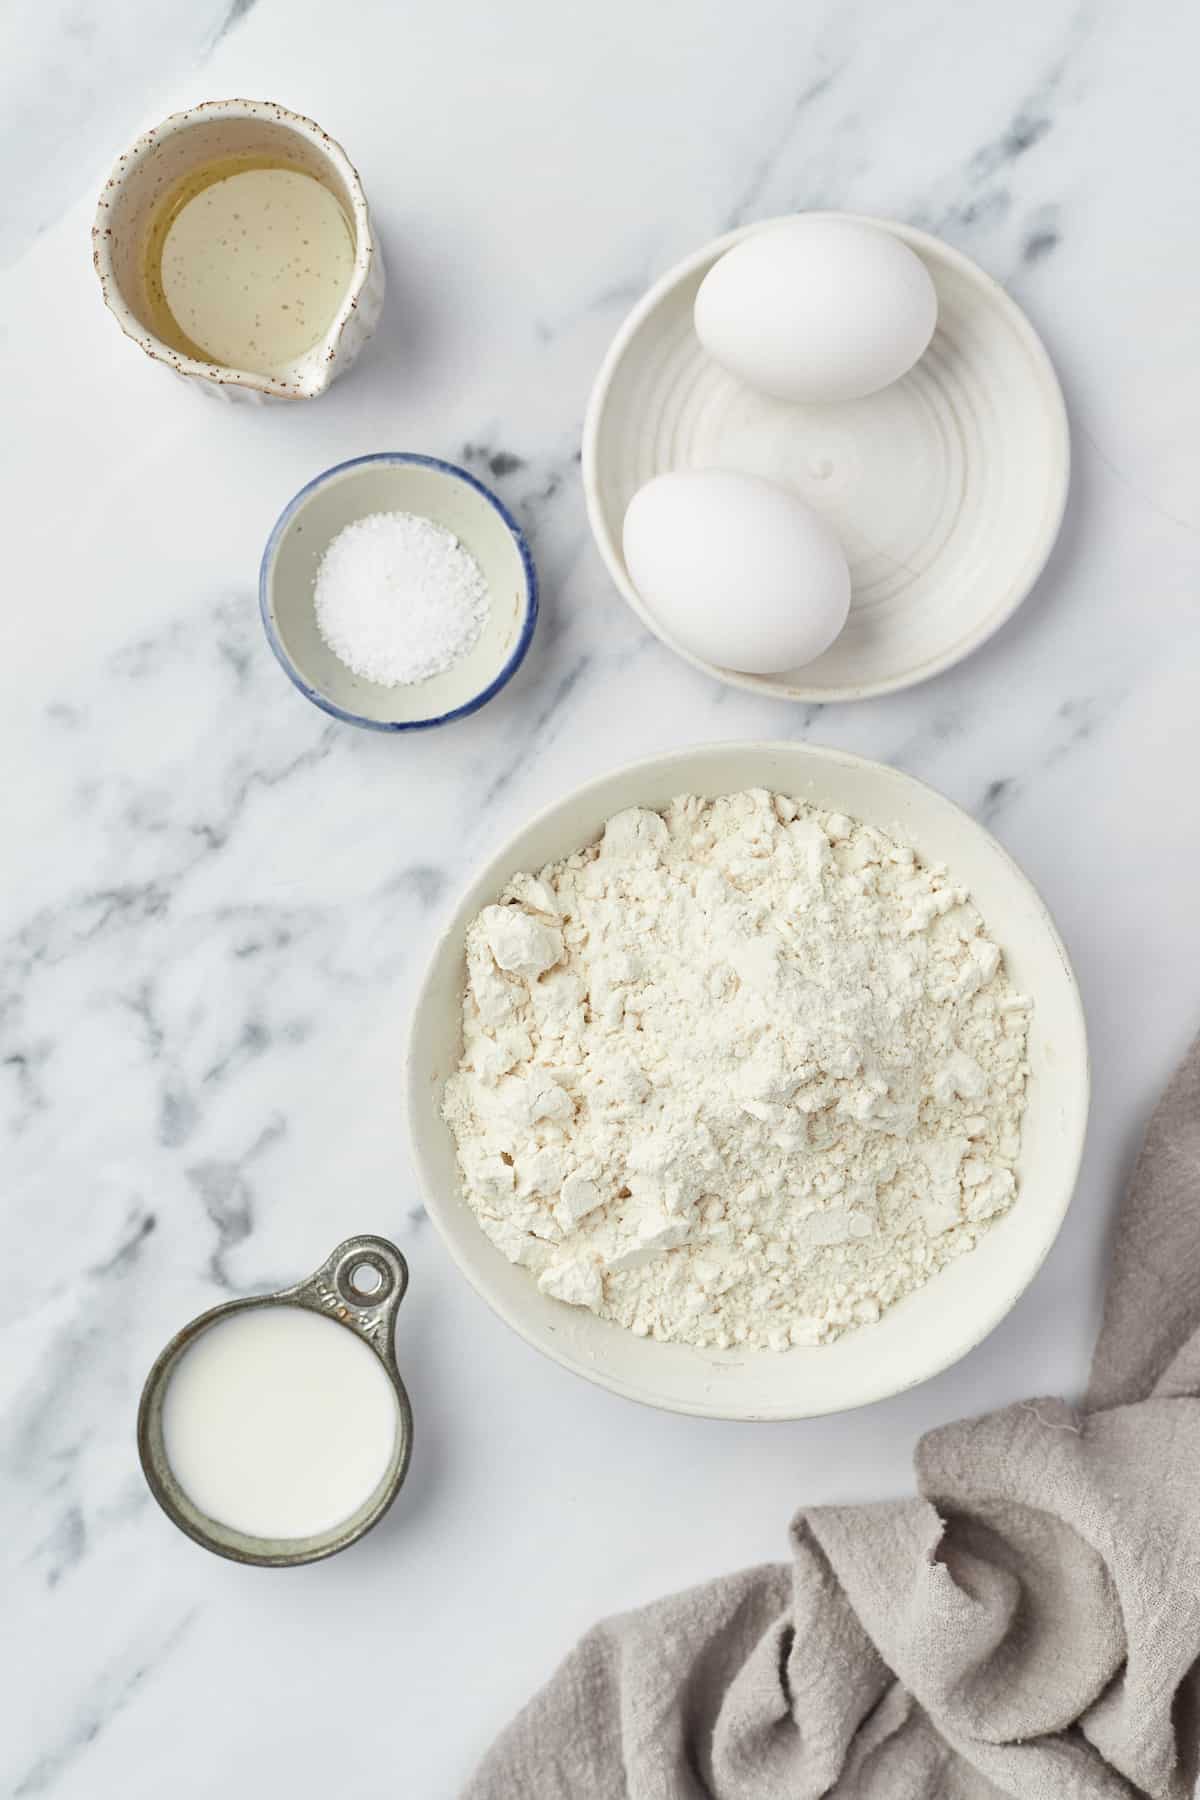 Two eggs, a bowl of flour and the rest of the egg noodle ingredients on a kitchen countertop